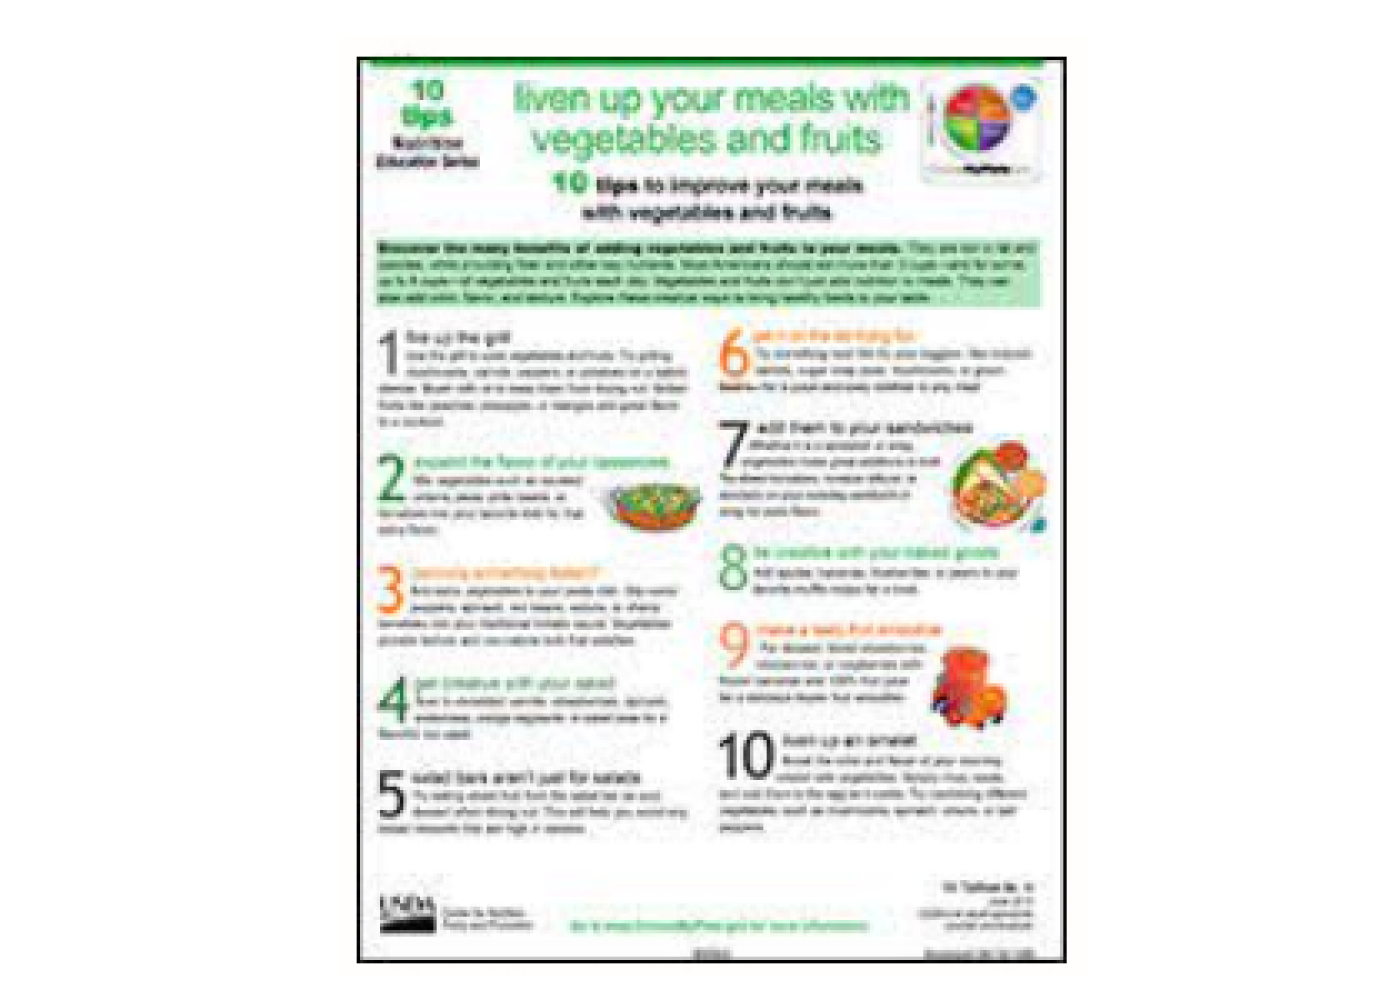 Thumbnail of "Liven up Your Meals with vegetables and Fruits" handout